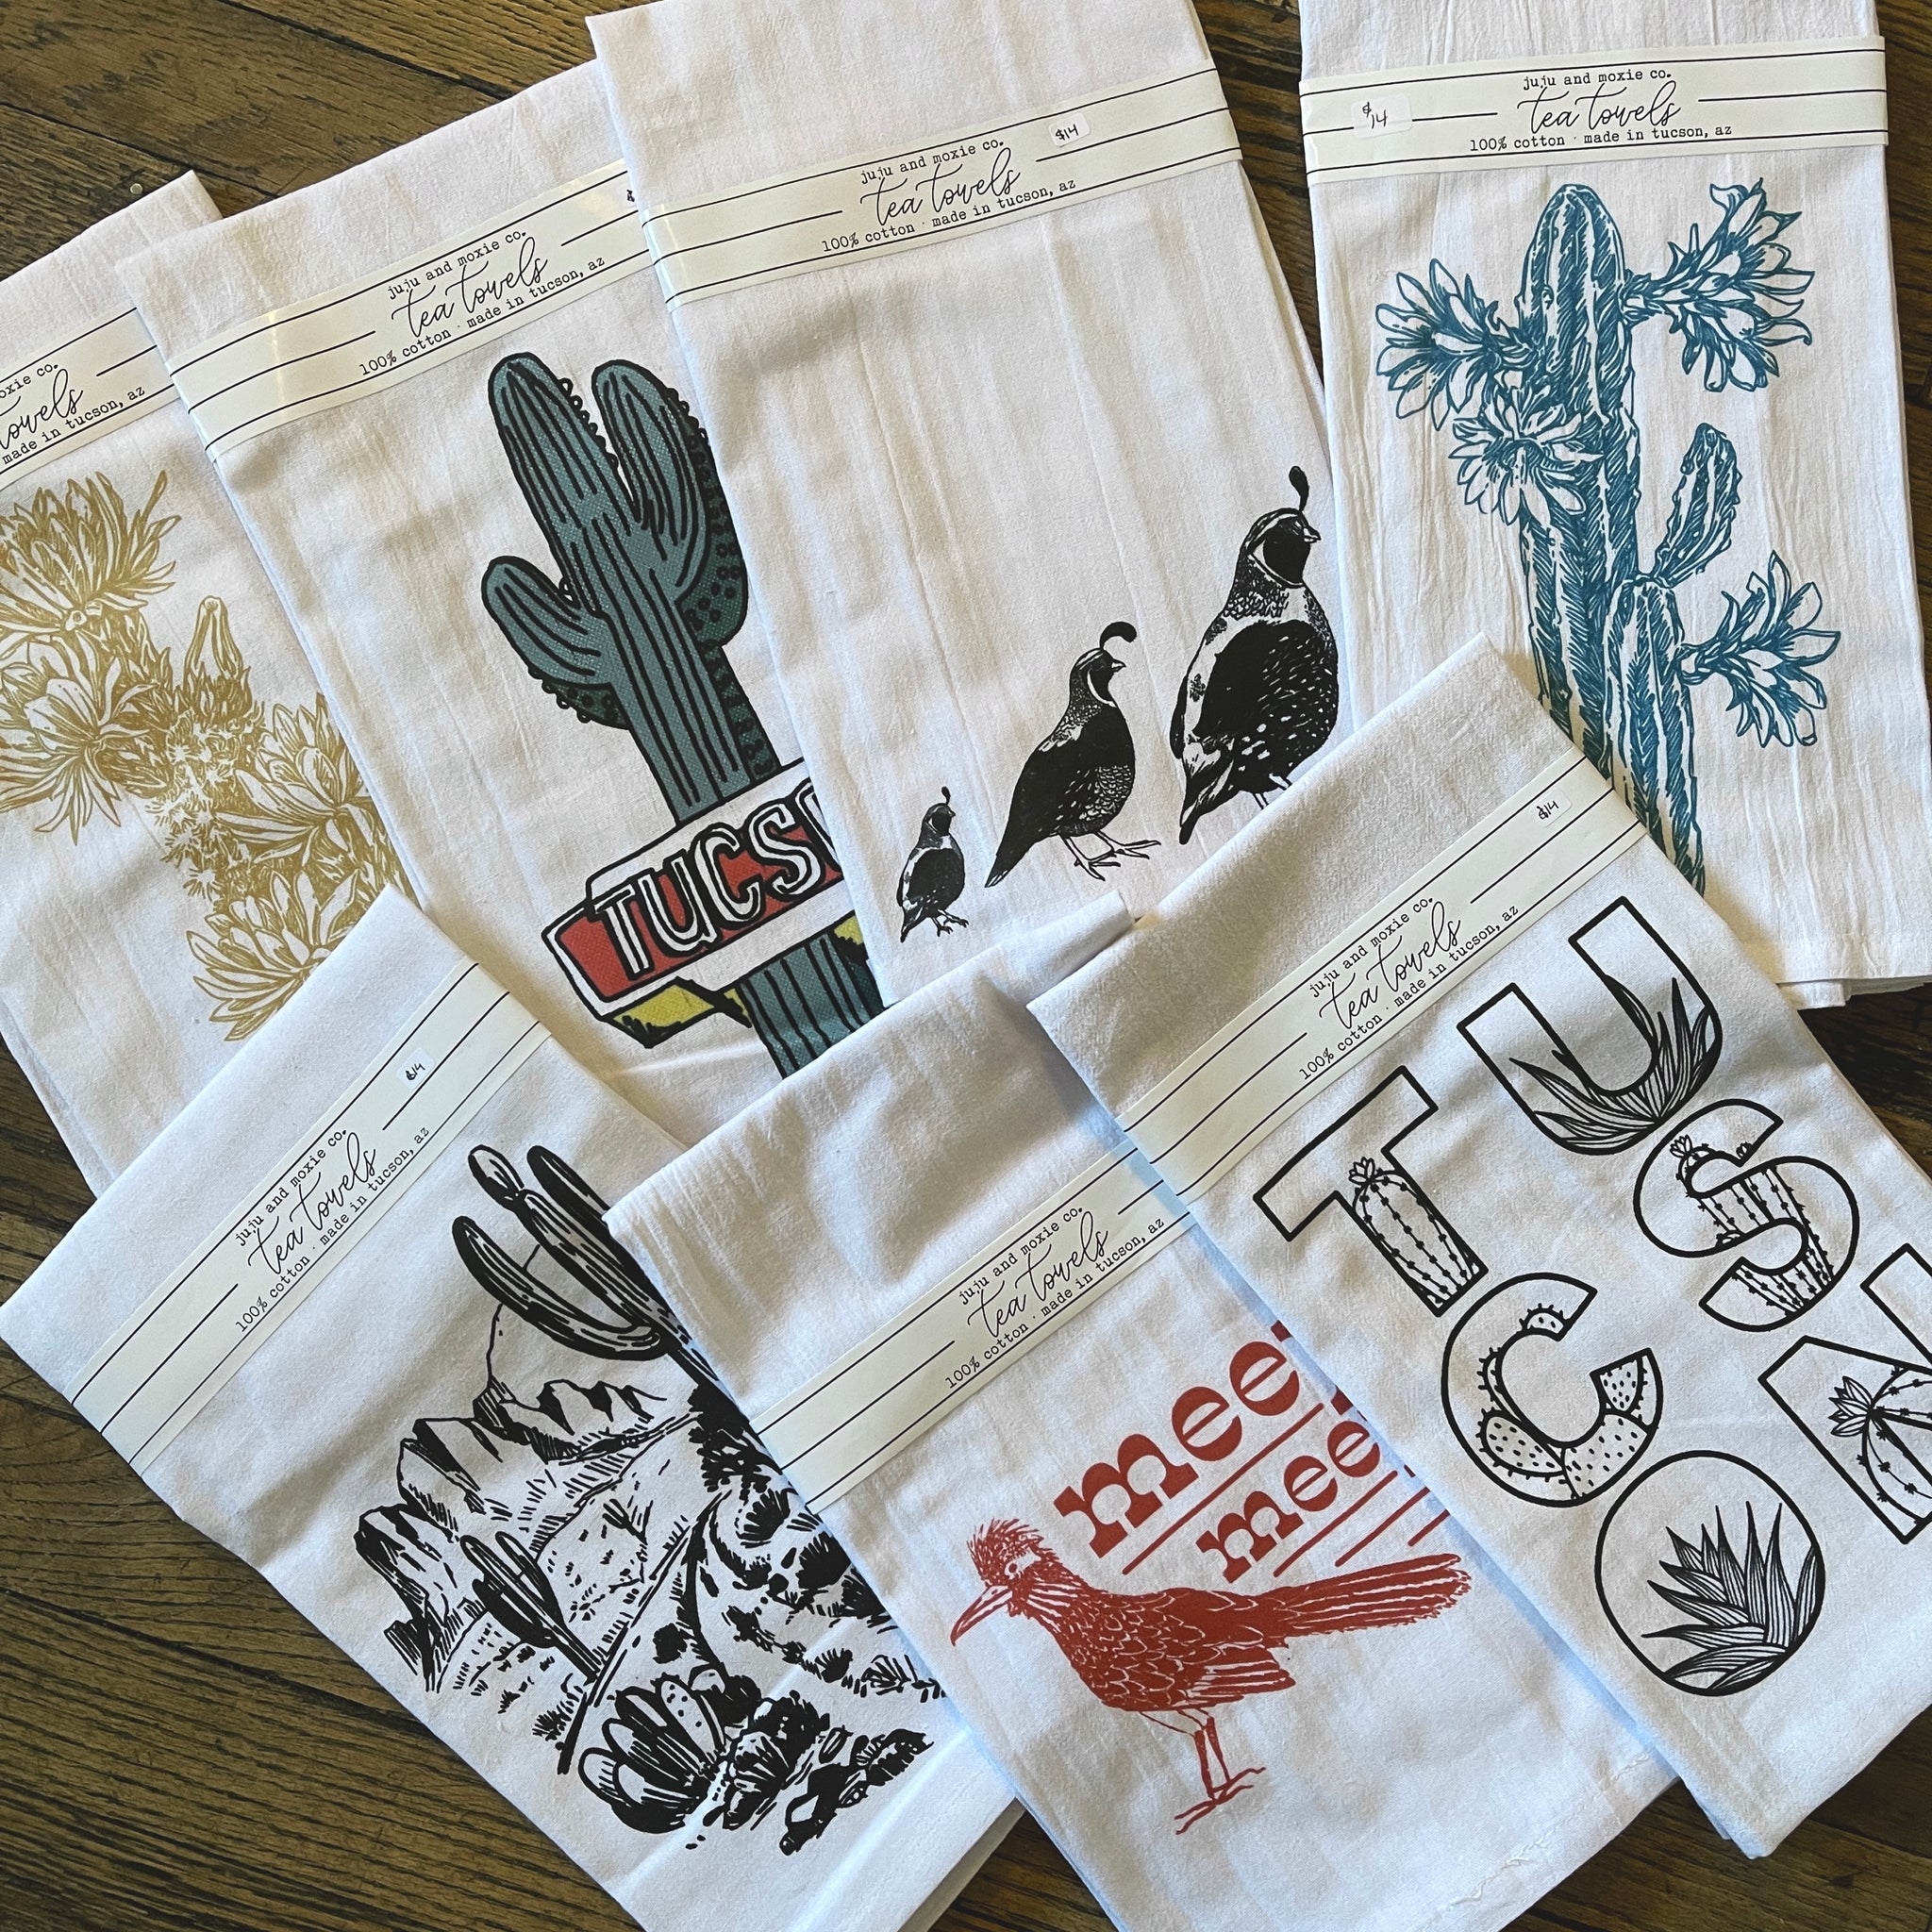 100% cotton towels by Juju and Moxie – Pop Cycle Tucson